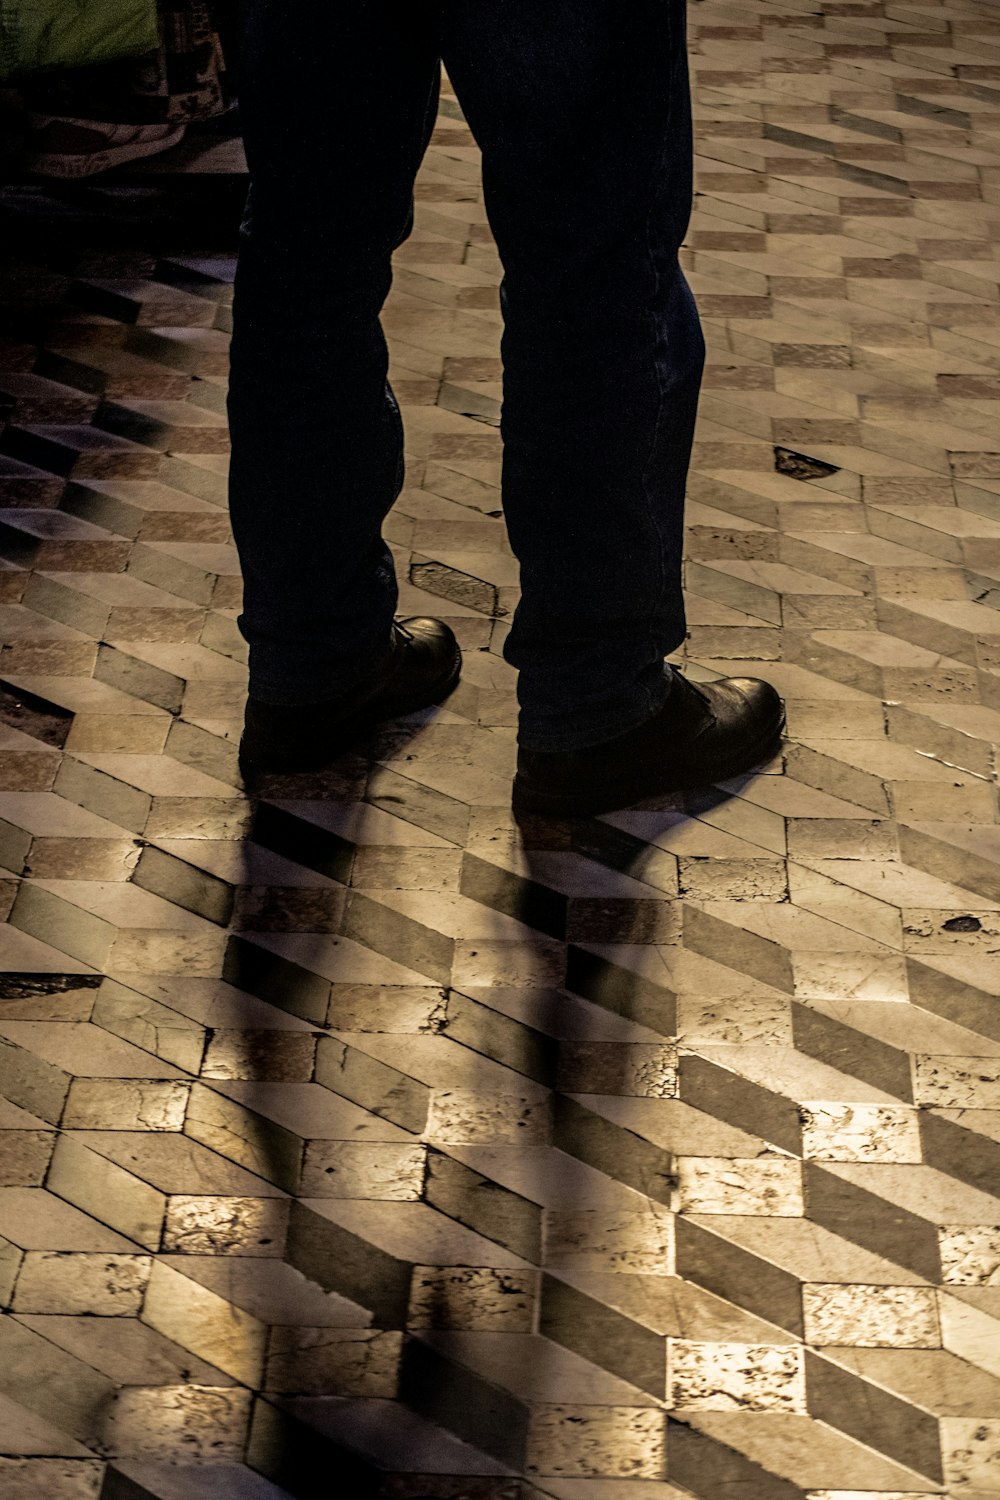 a person standing on a tiled floor with their shadow on the ground